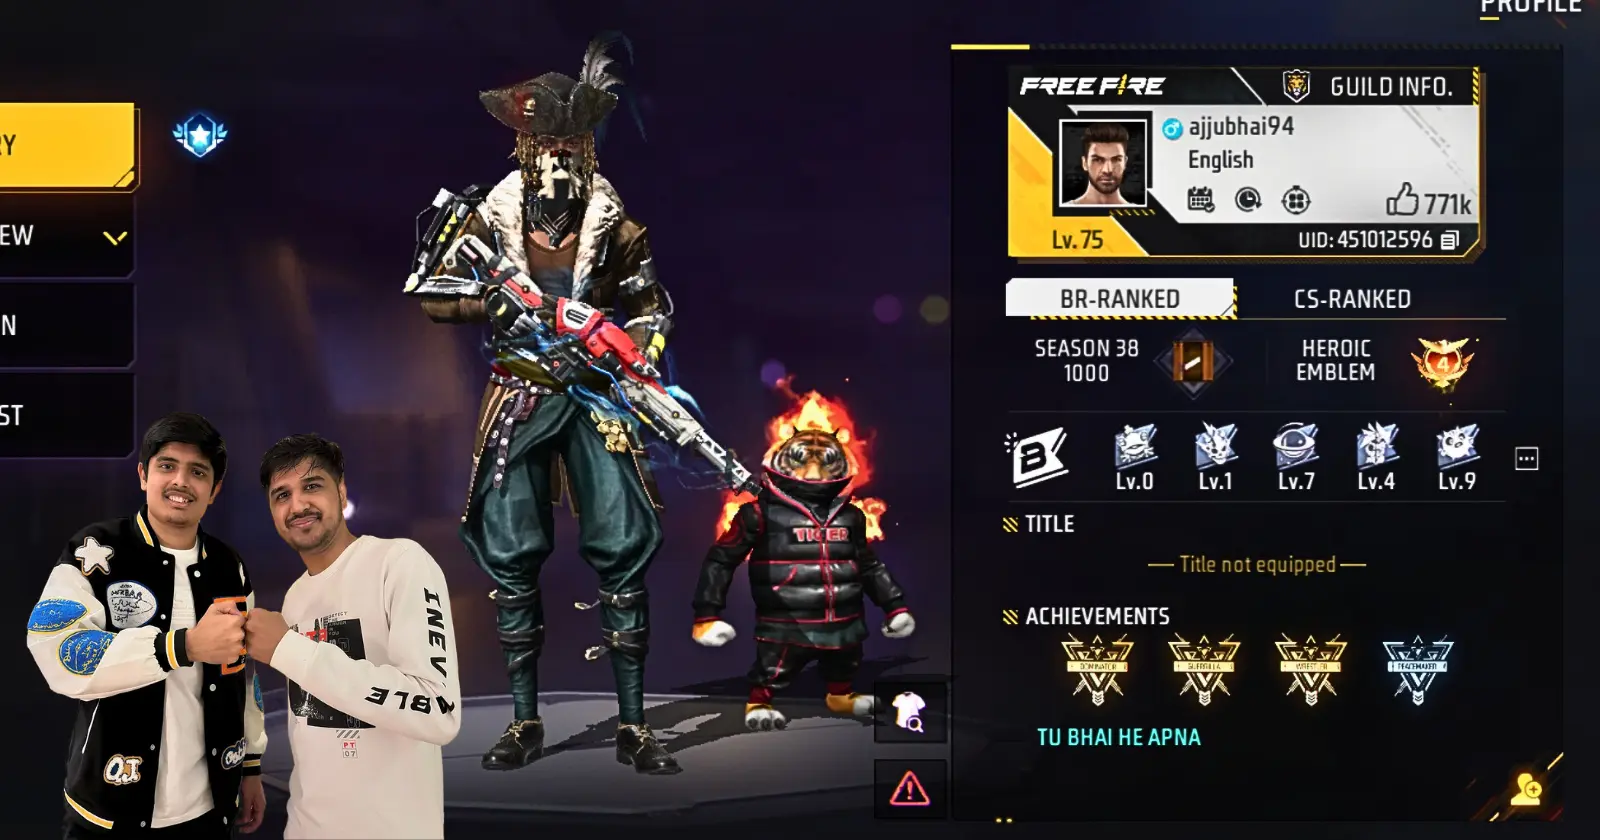 Free Fire gaming profile screenshot of a stylish character representing Ajjubhai. Game statistics and achievements are displayed on the right